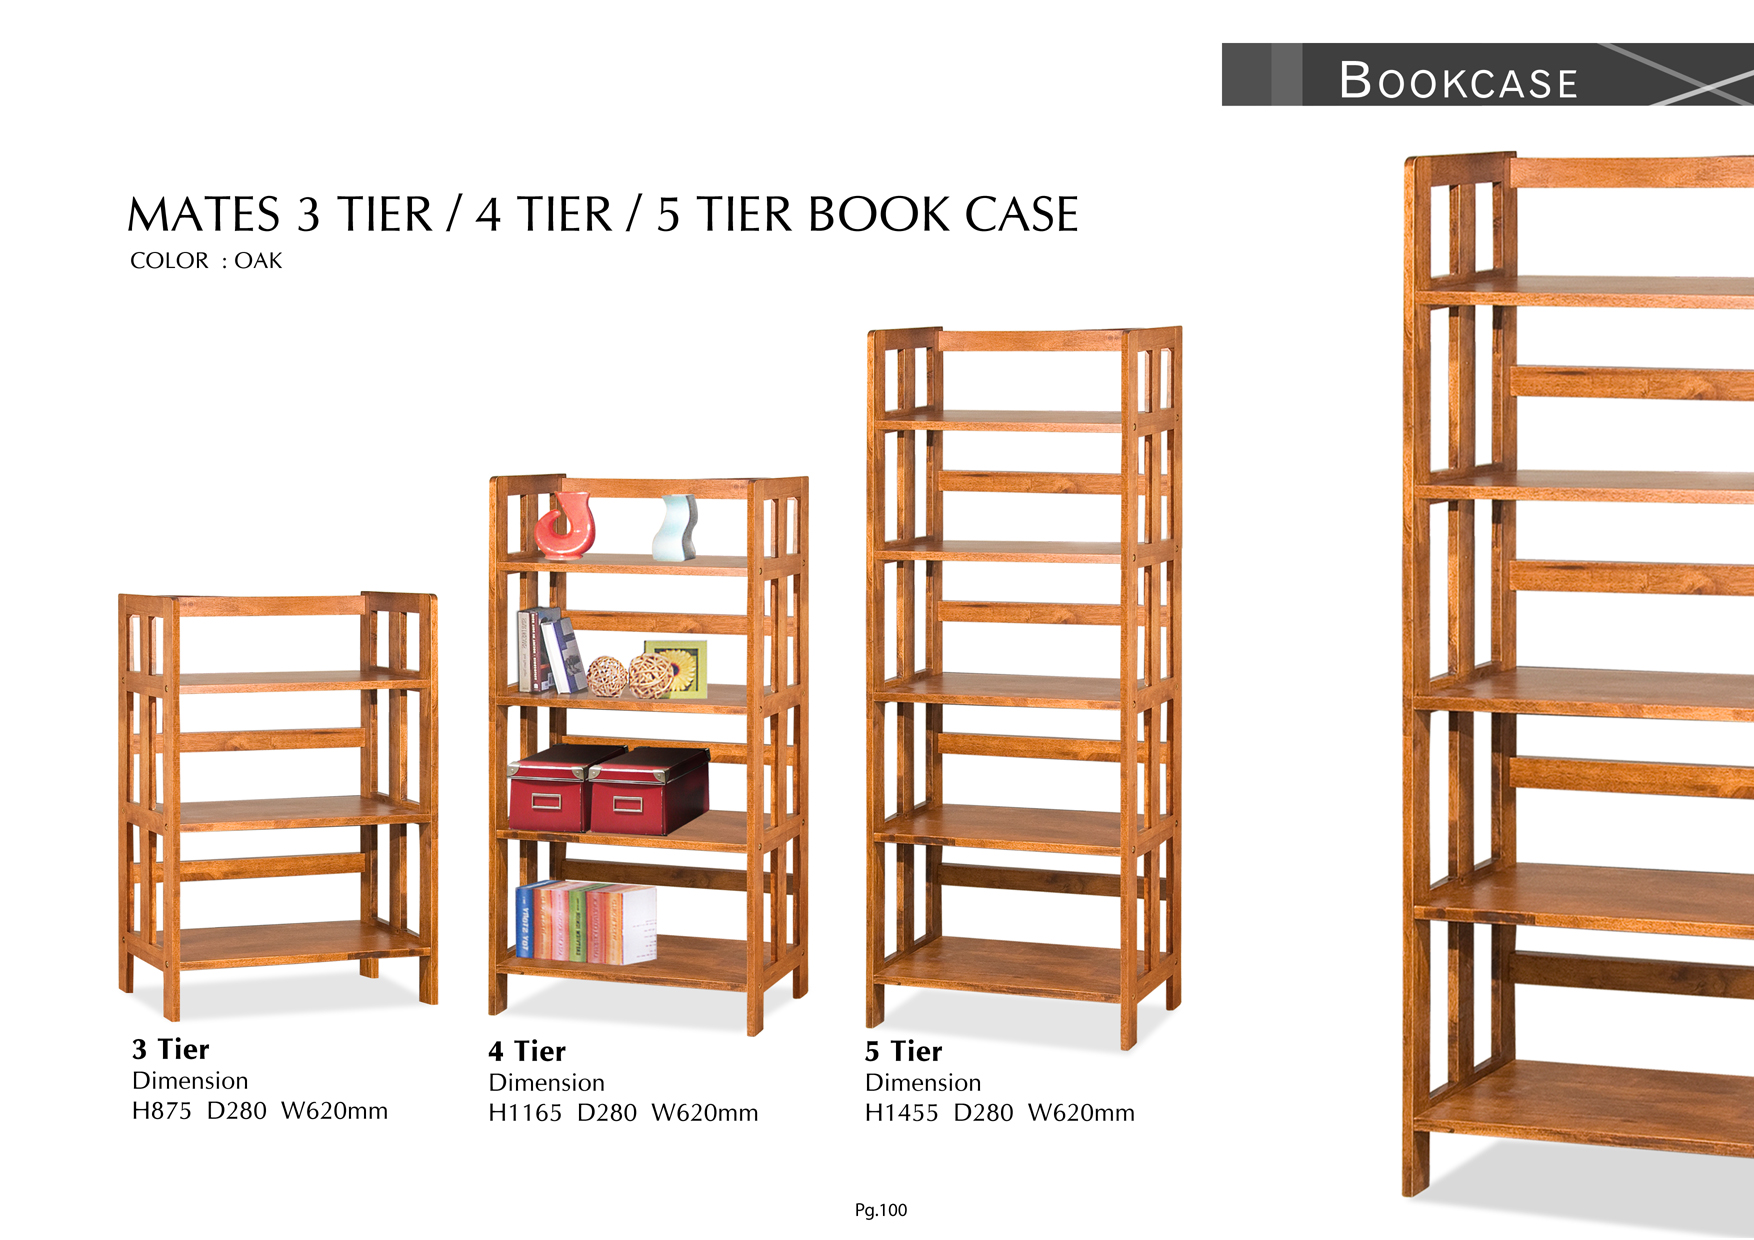 Product: PG100. MATES TIER BOOK CASE